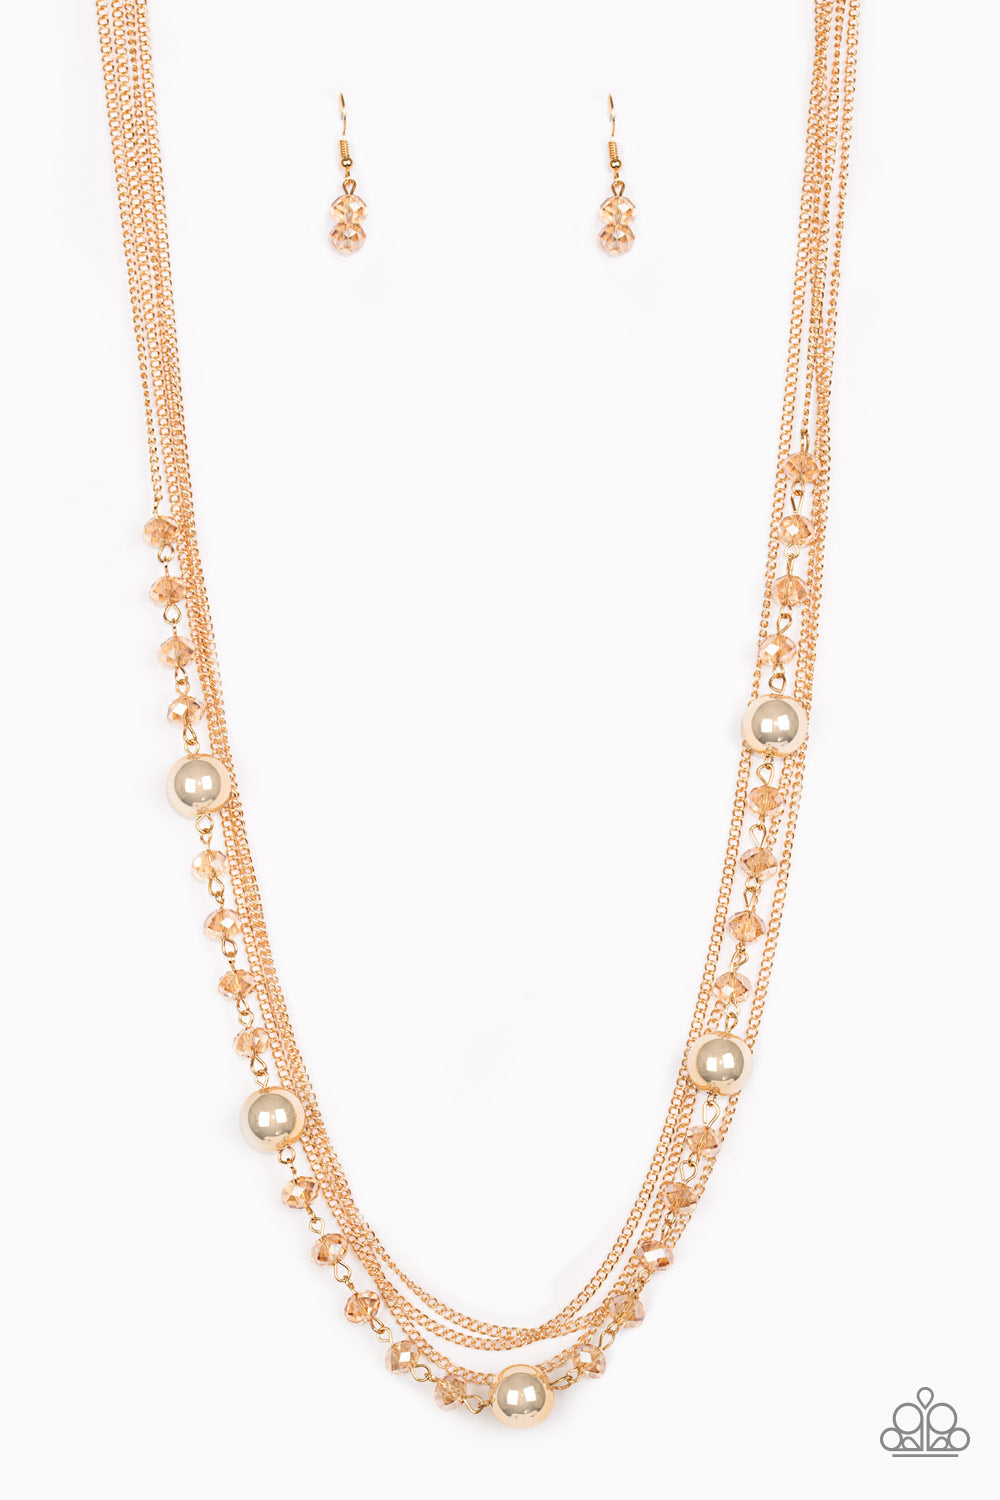 Paparazzi High Standards Gold Necklace